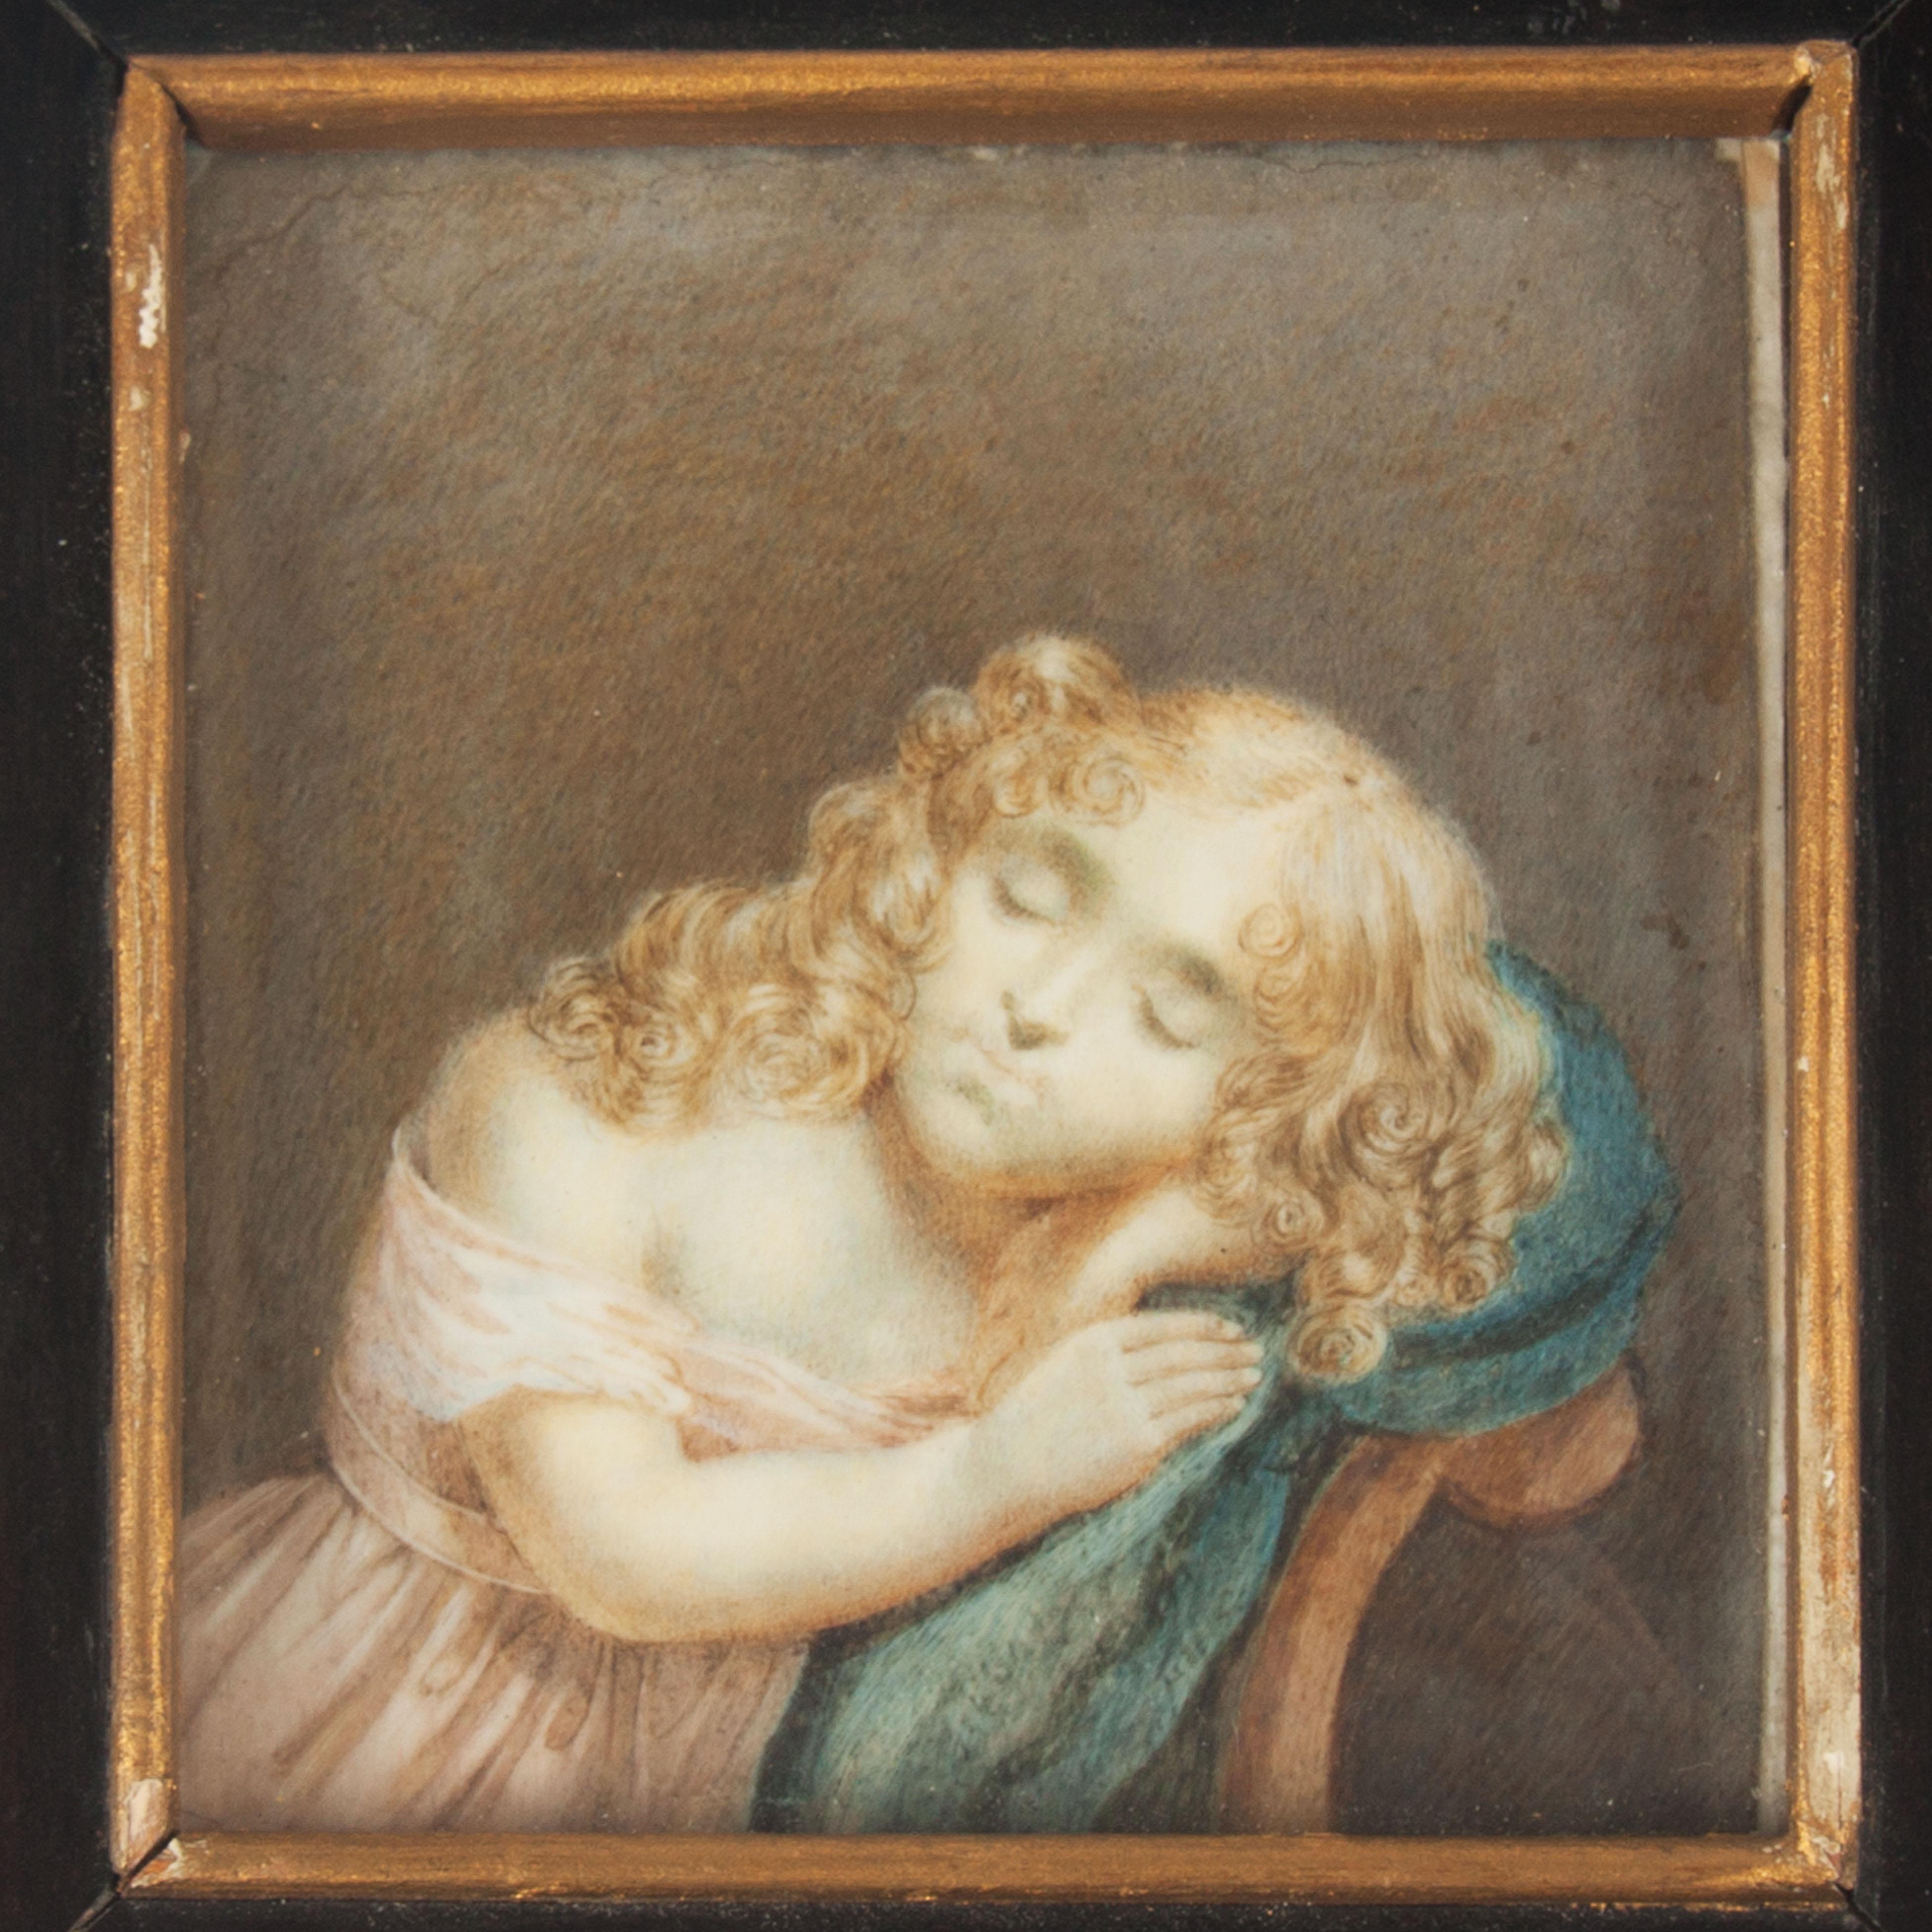 Painted miniature of a girl, depicting Nicolette six.
Dated 1818.